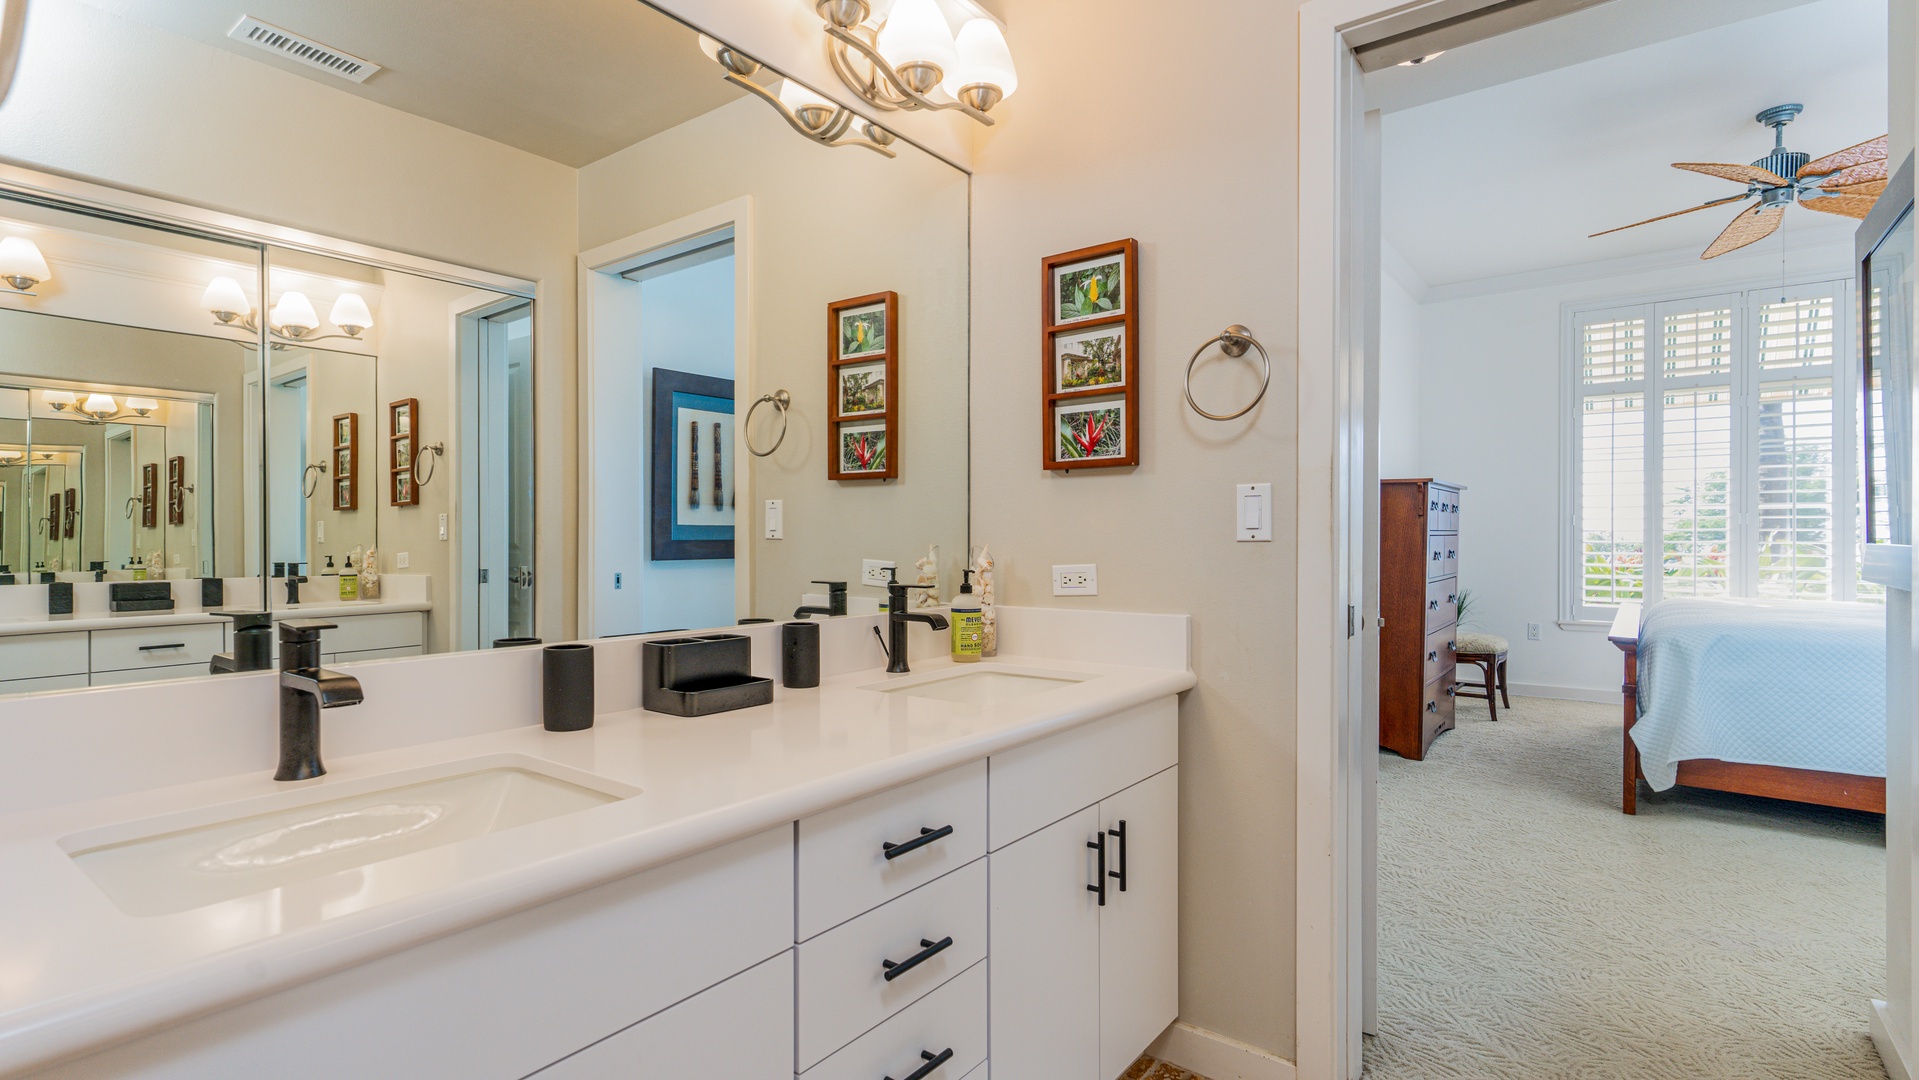 Kapolei Vacation Rentals, Kai Lani 24B - The primary guest bathroom with a double vanity.